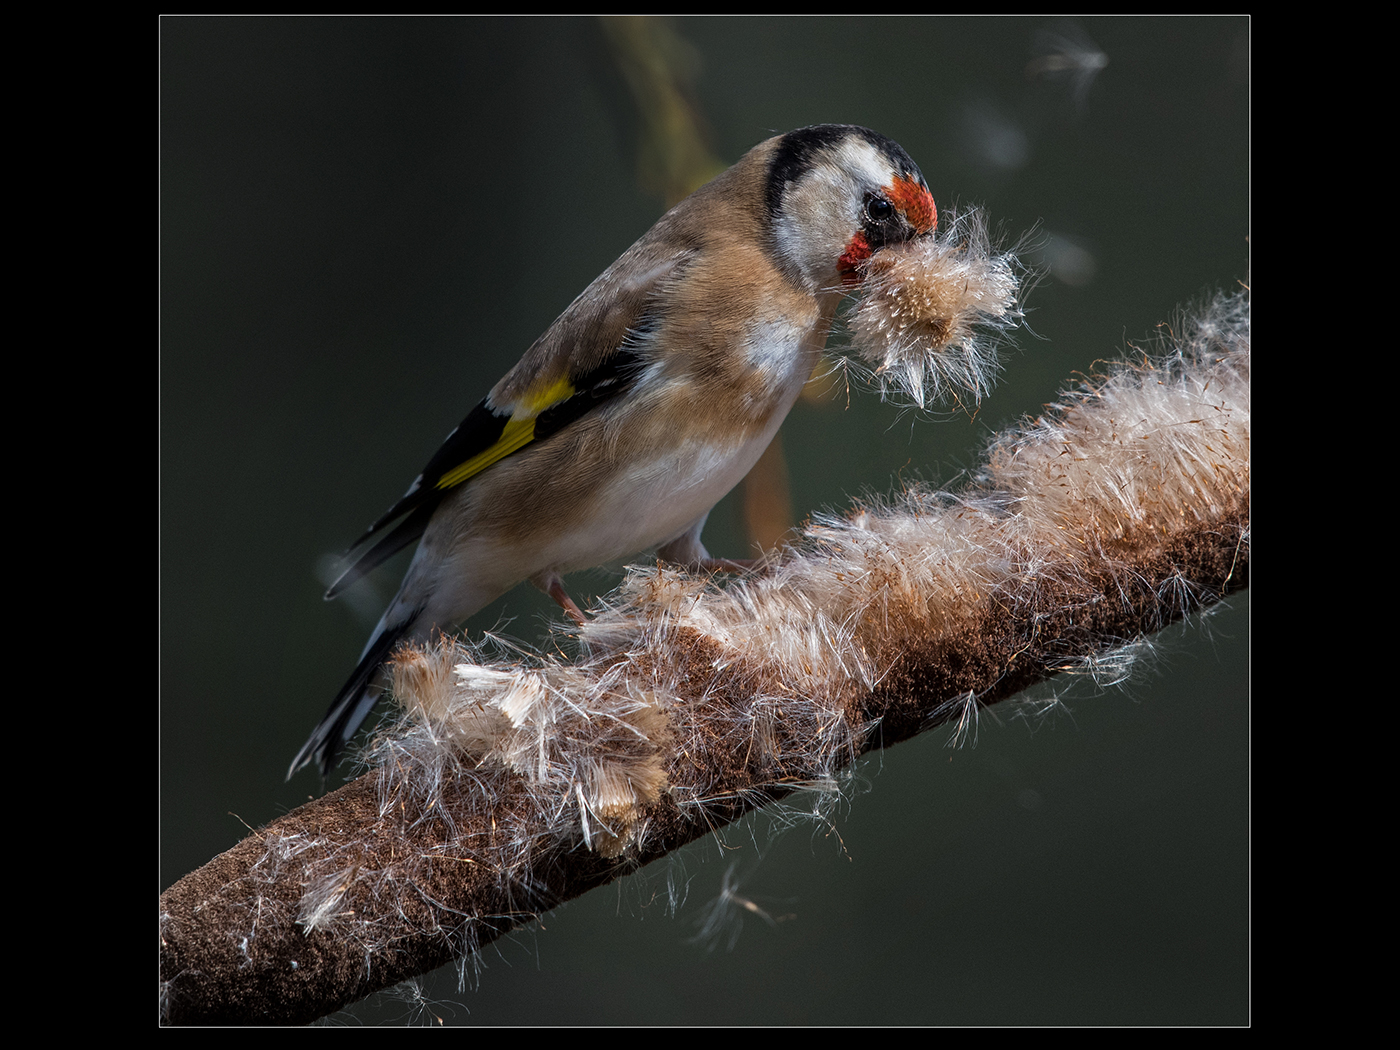 Gold finch collecting nesting material of a bullrush